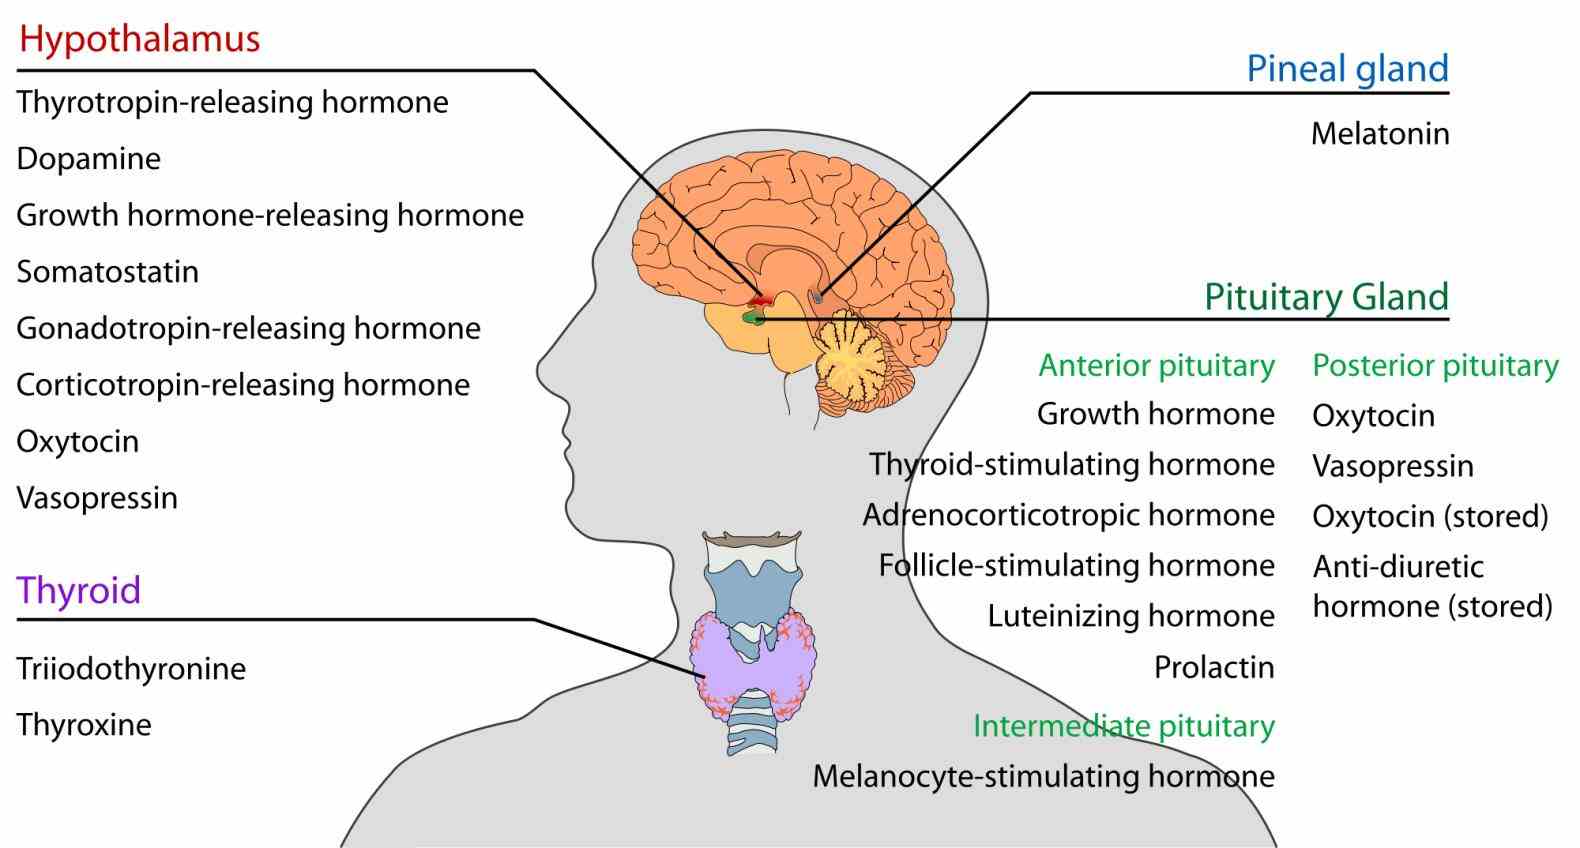 release hormones permitting them to act in concert respond changes the body maintain stability homeostasis de Endocrine System Functions